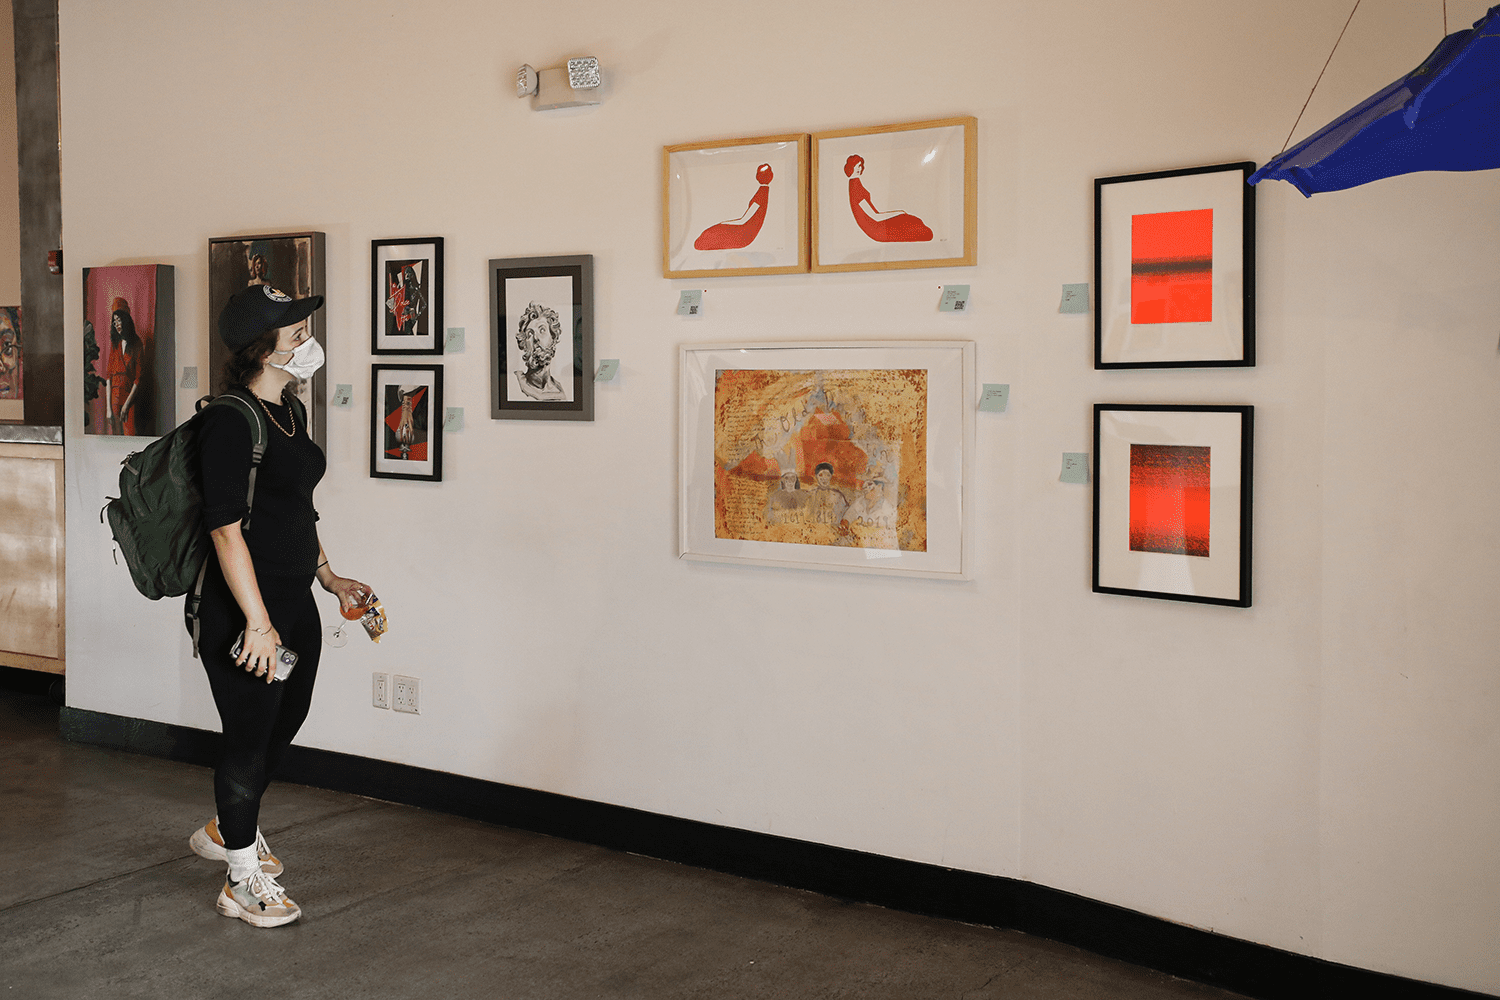 A person looks at an art gallery wall covered in various paintings and pieces.